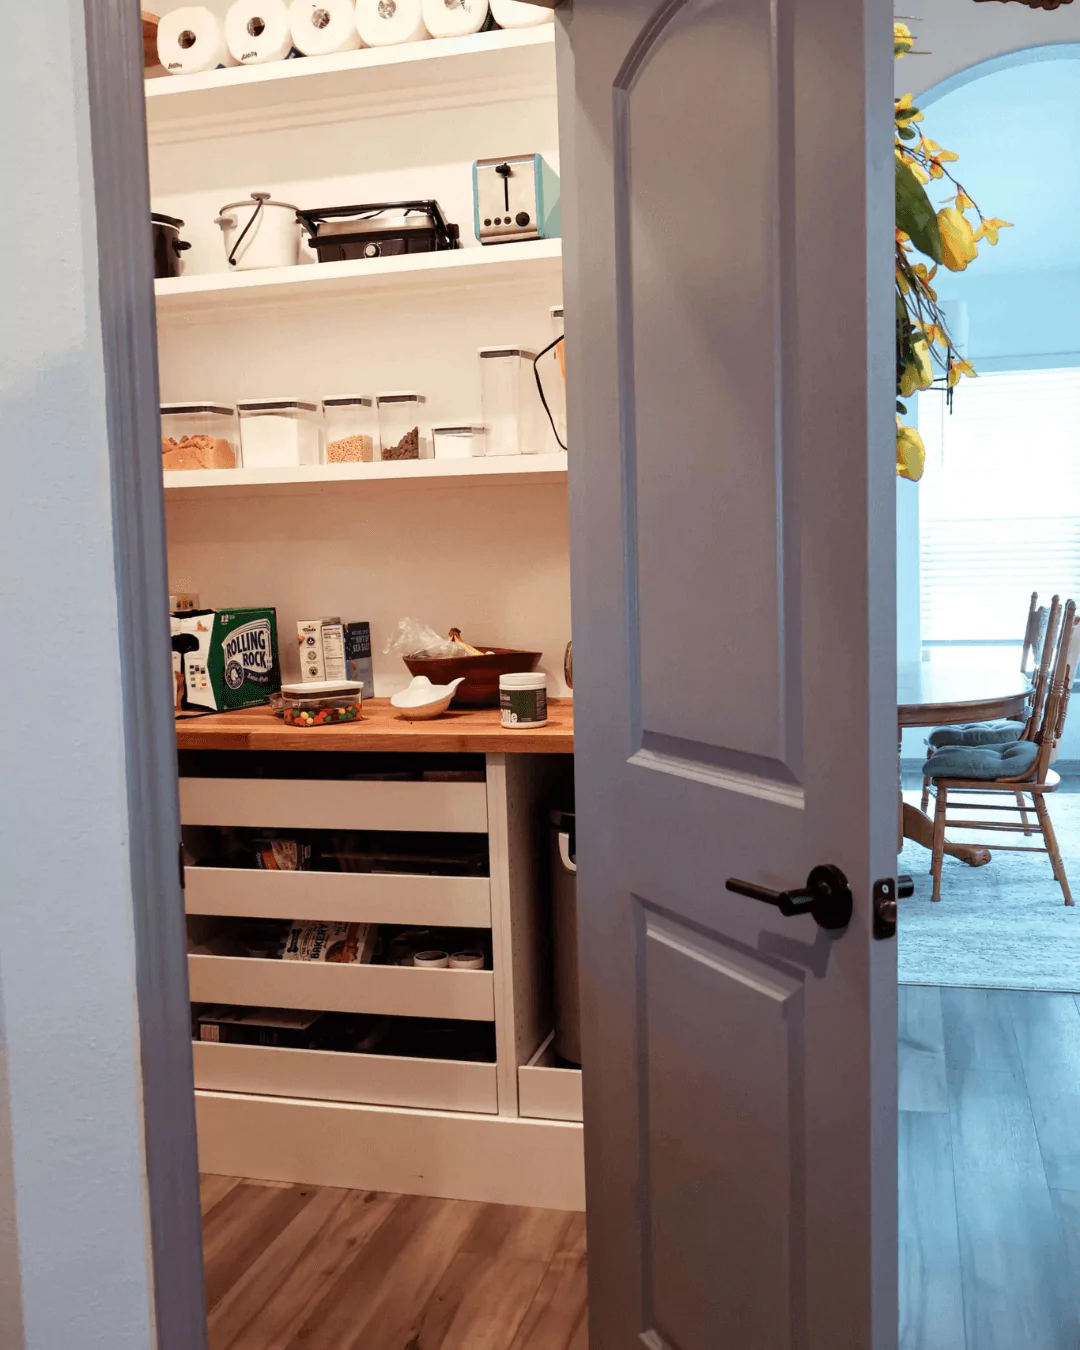 How to Organize and Style a Kitchen Pantry